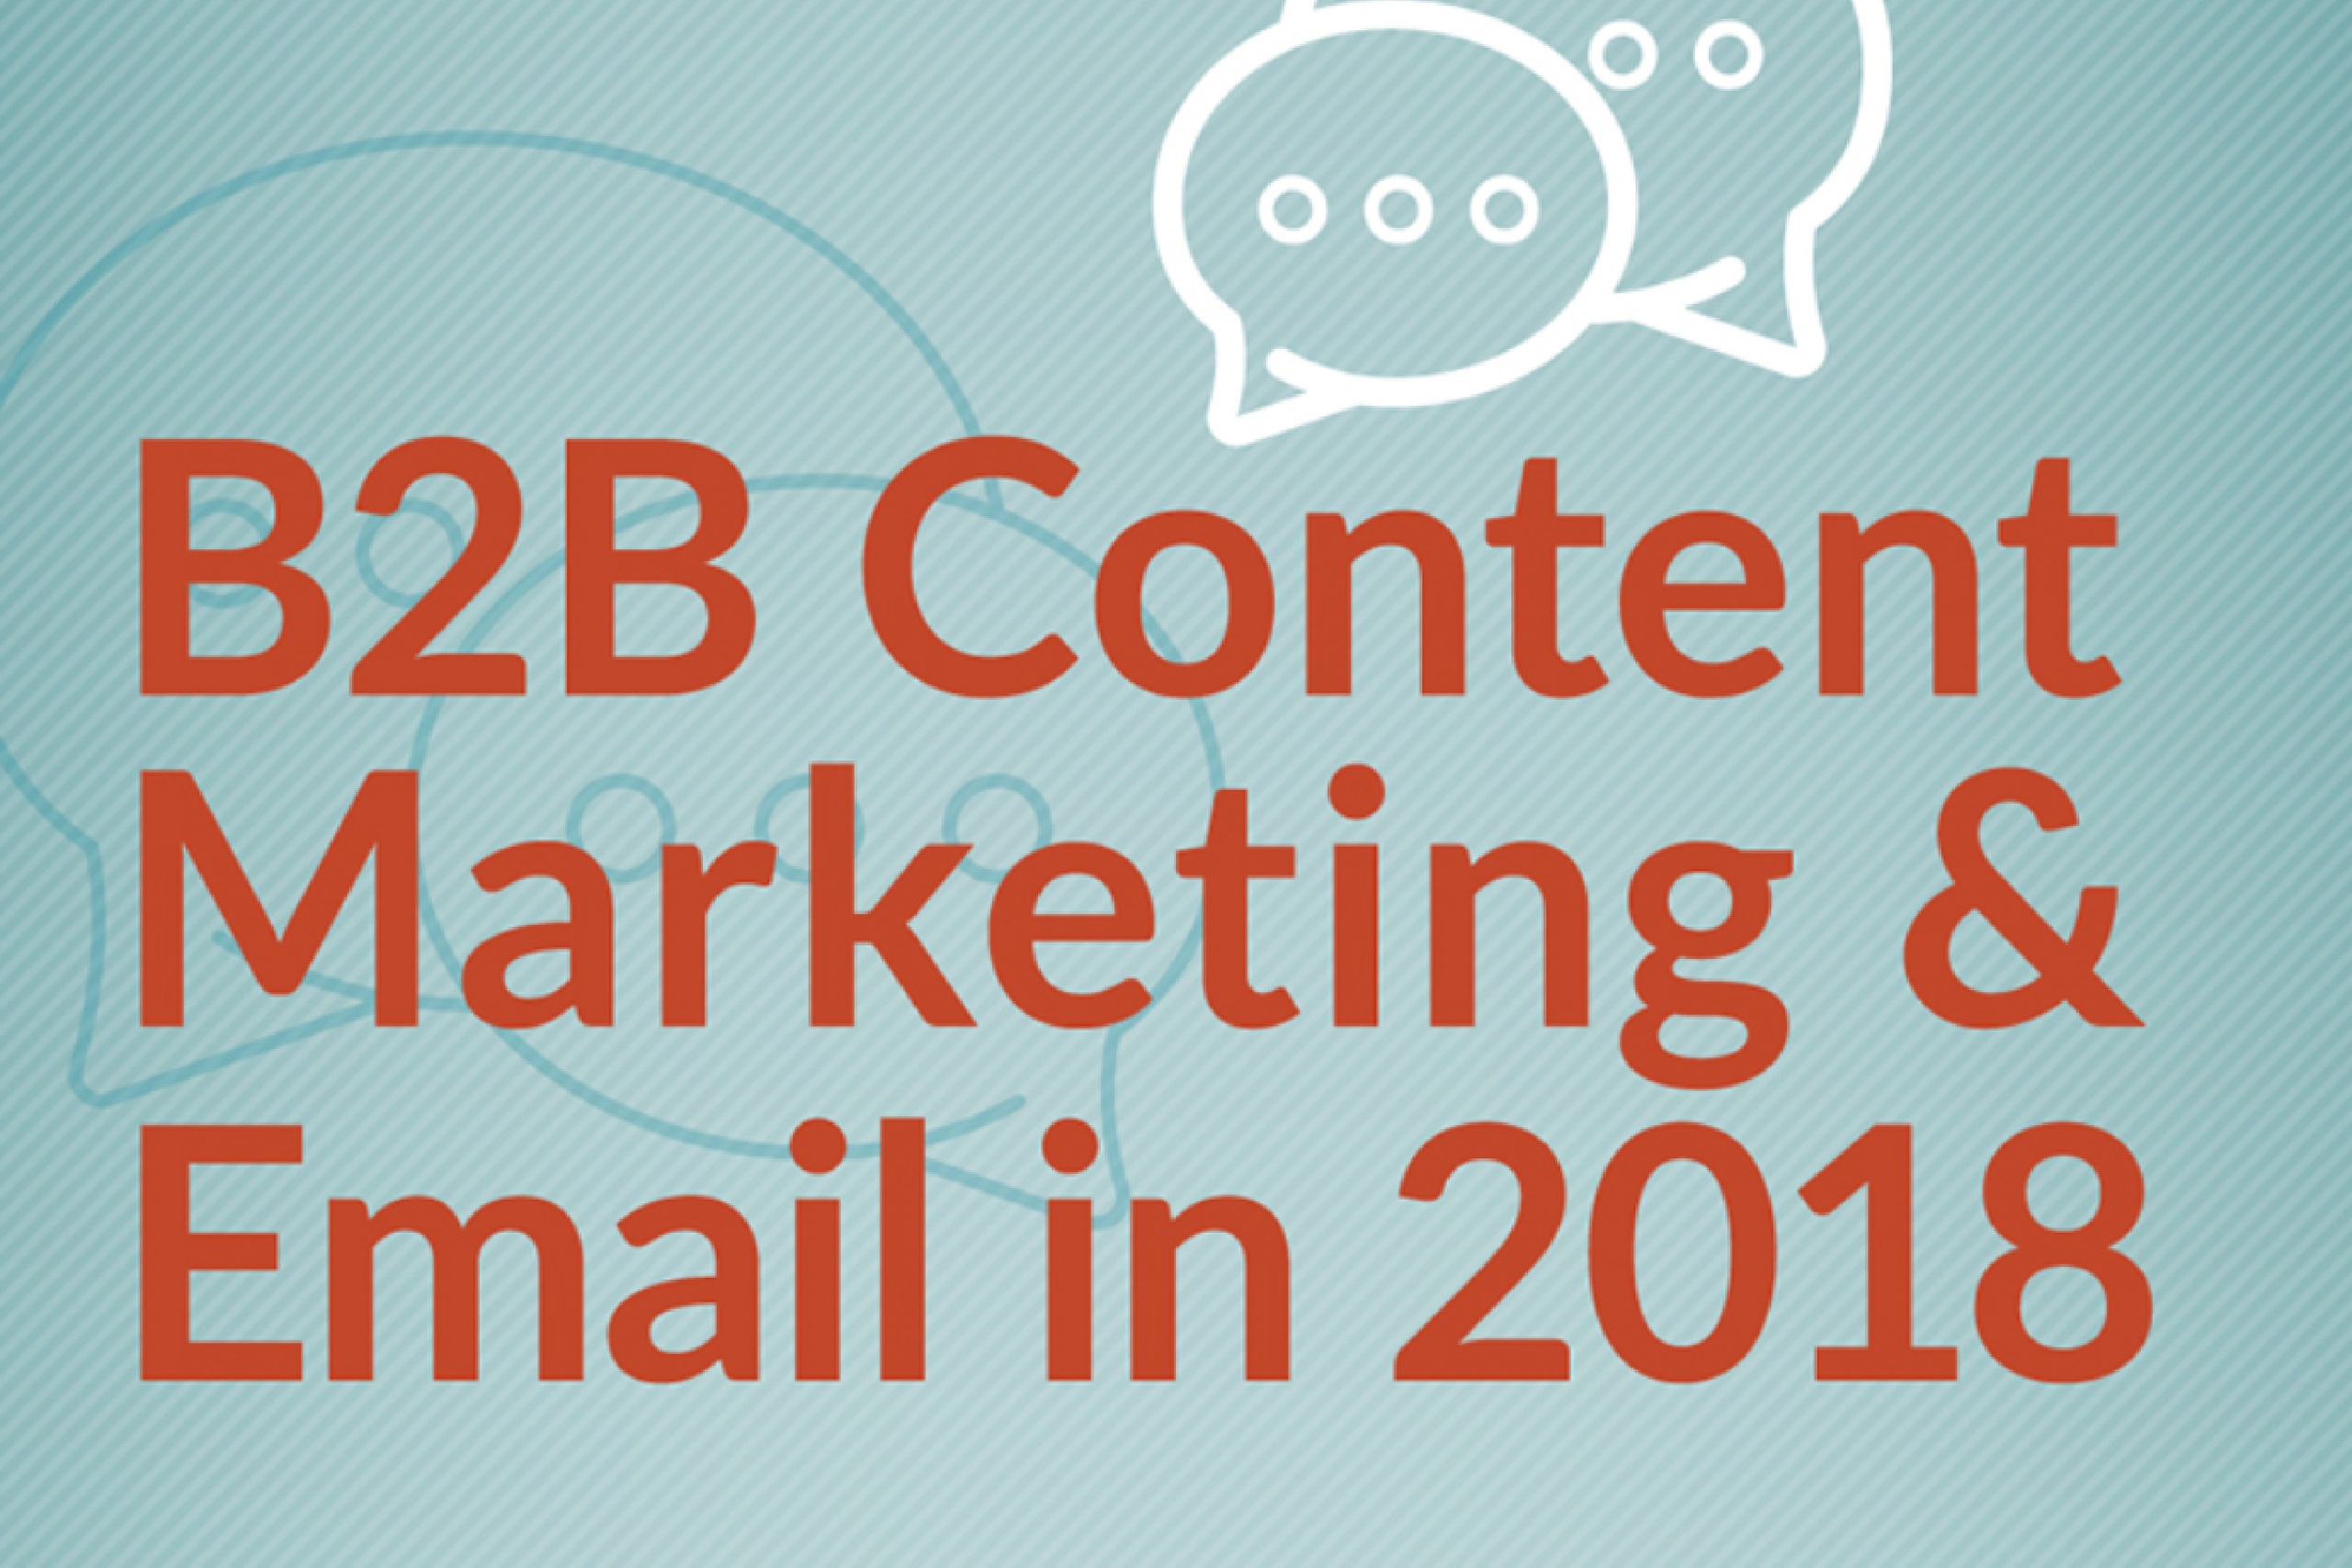 B2B Content Marketing & Email Marketing in 2018